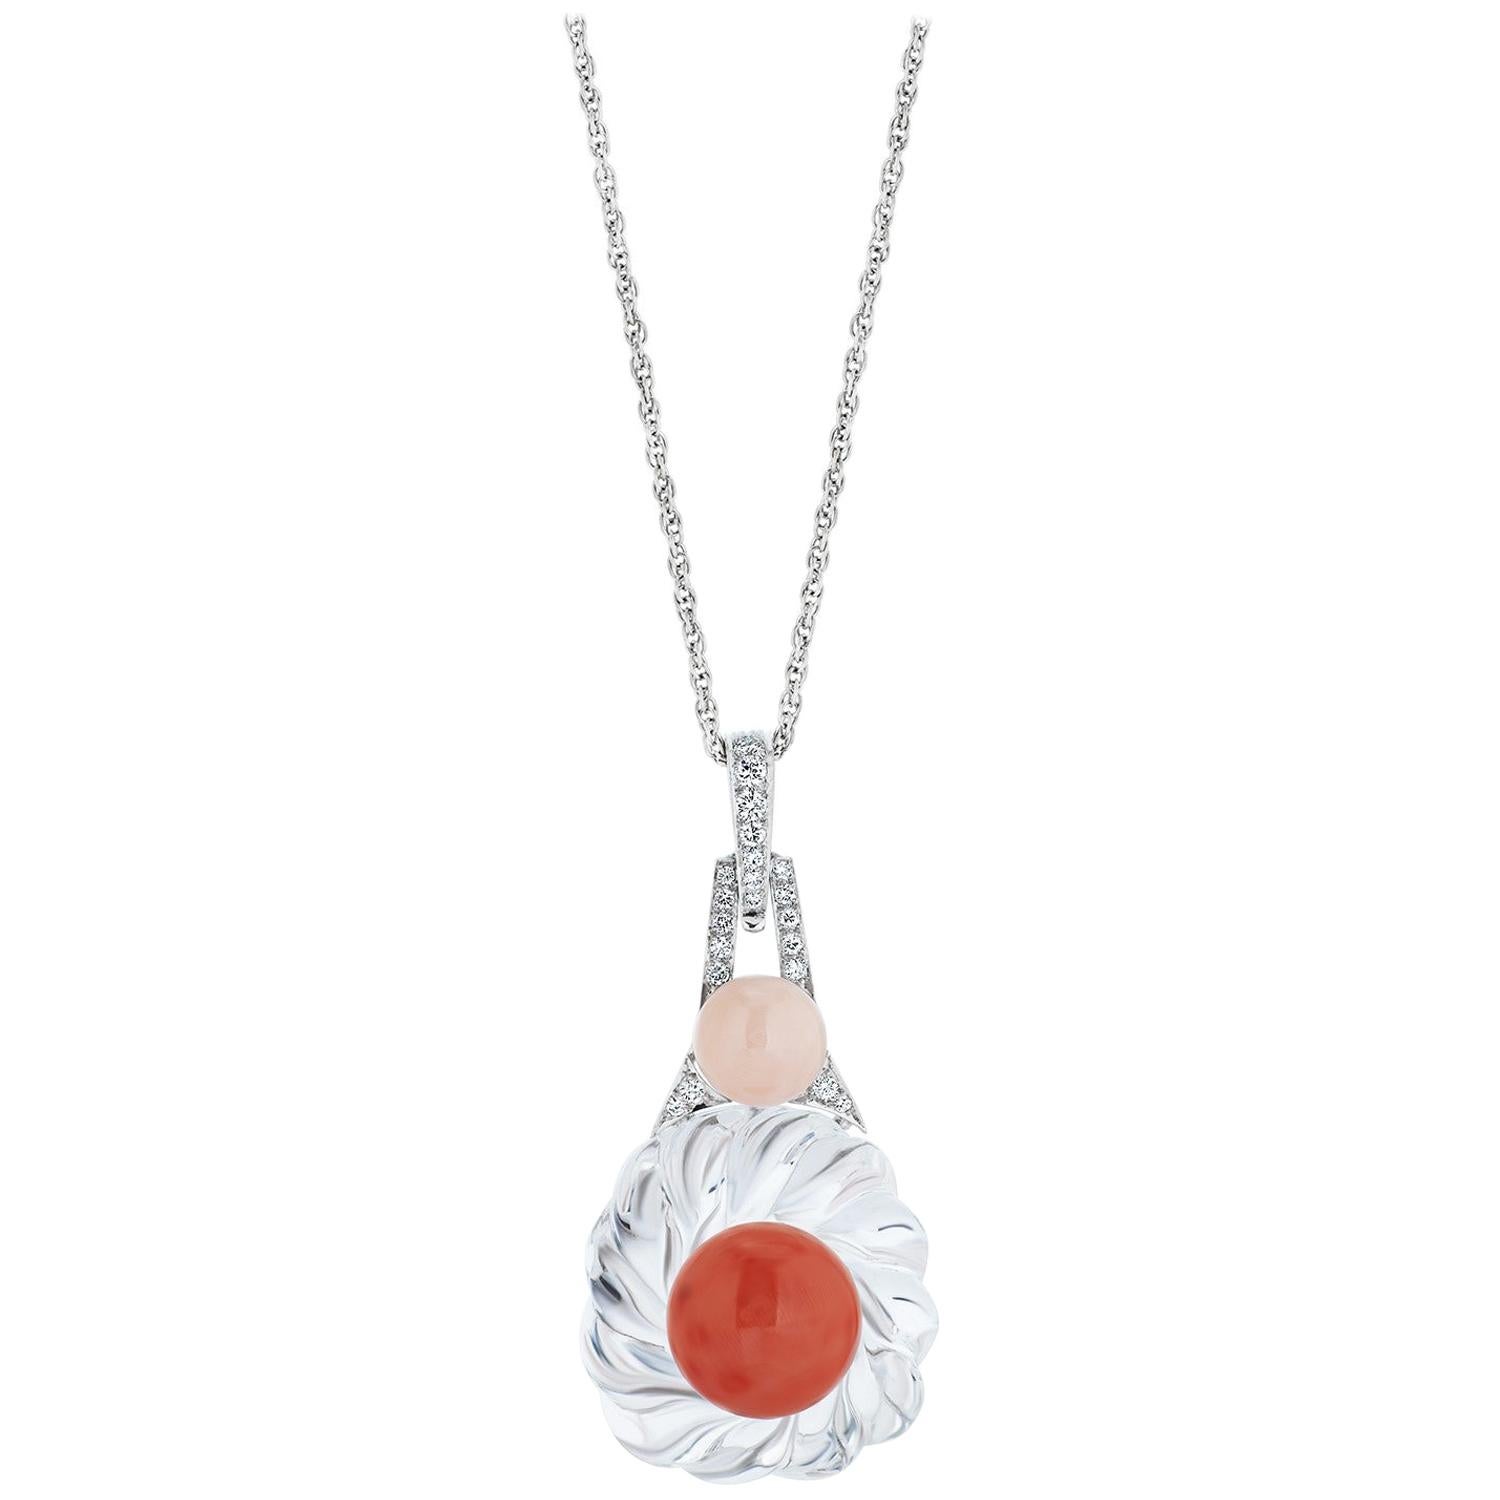 David Webb Rock Crystal, Coral, Angelskin Coral and Diamond Pendant Necklace